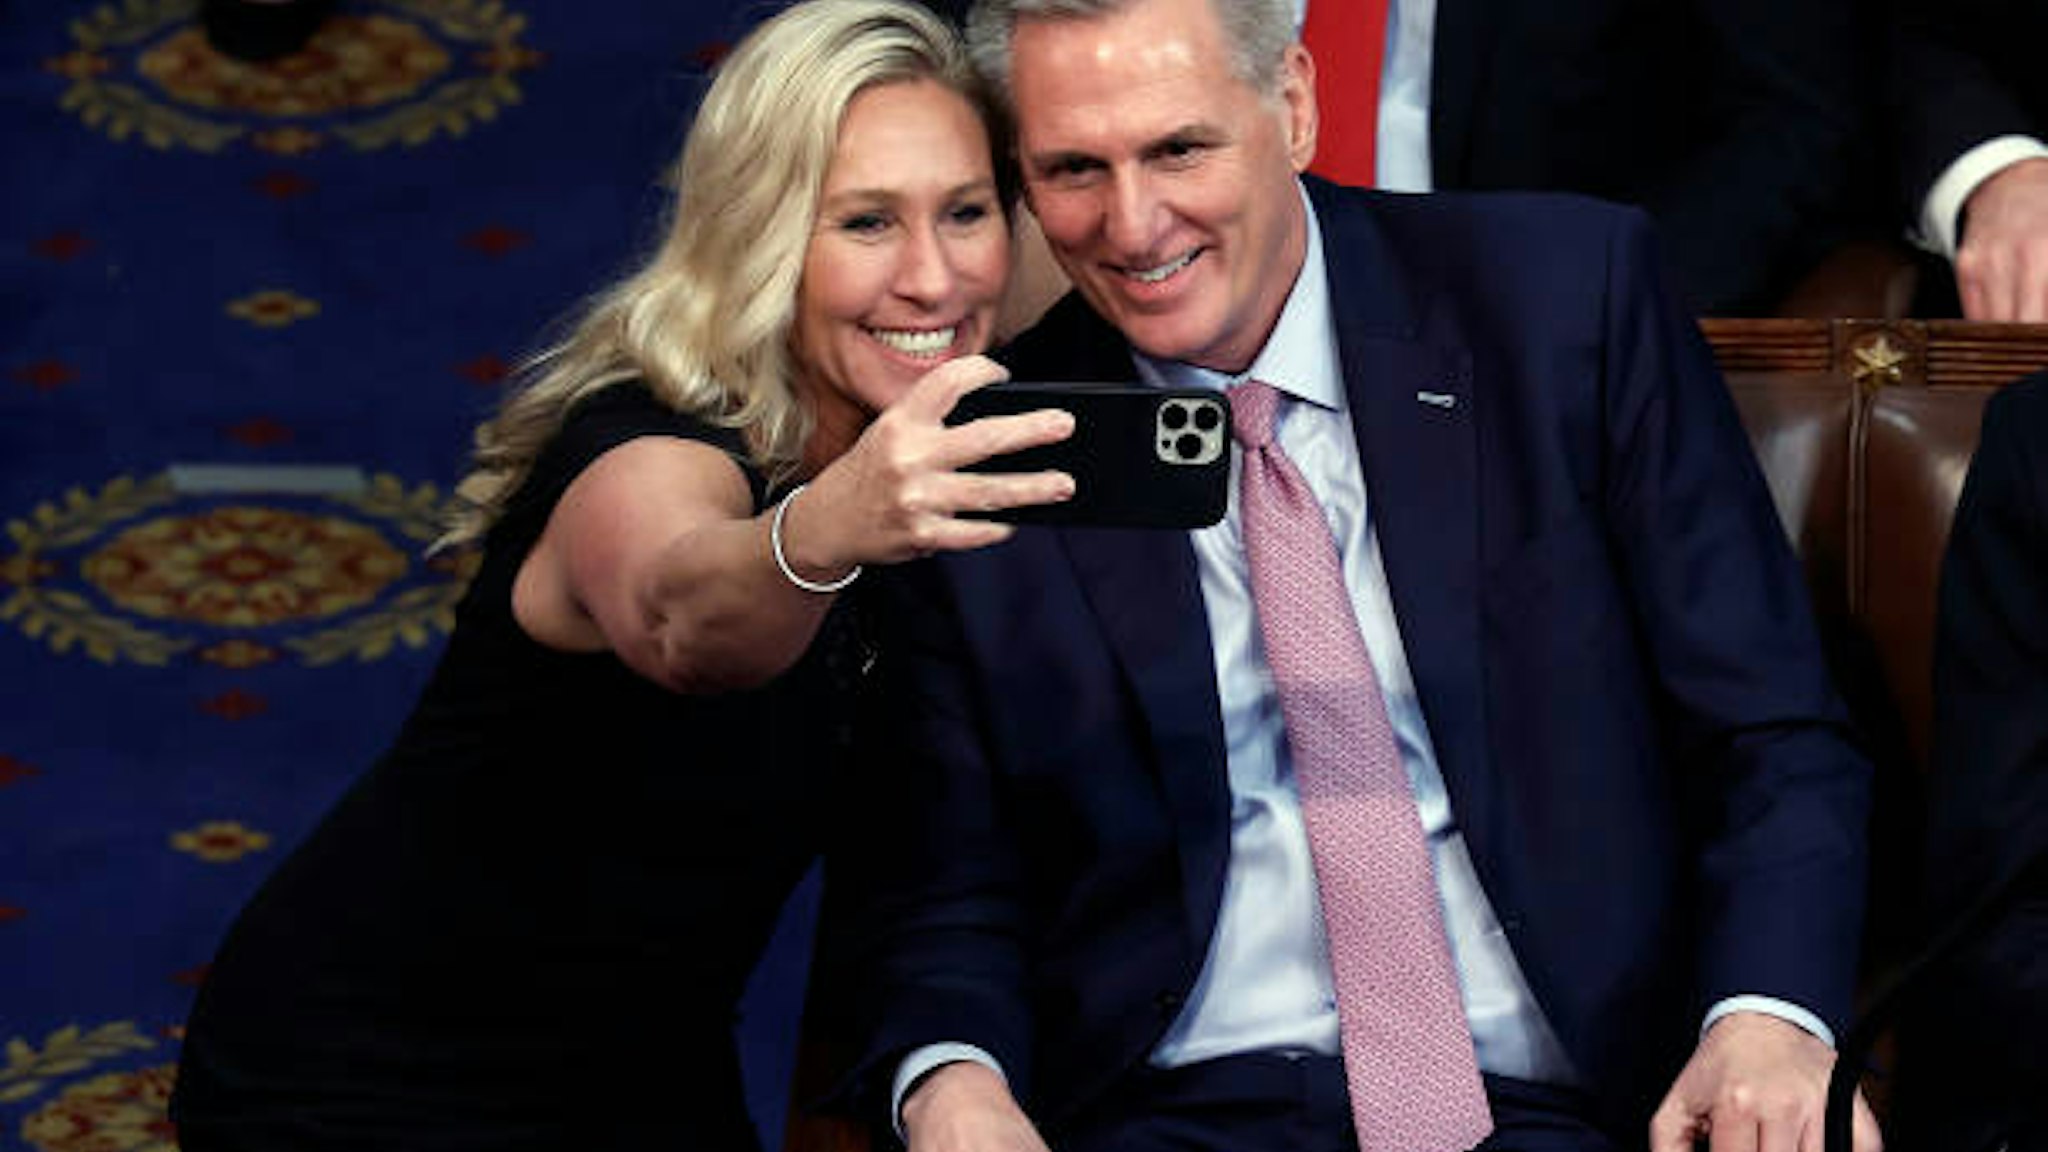 WASHINGTON, DC - JANUARY 06: Rep.-elect Marjorie Taylor Greene (R-GA) takes a photo with U.S. House Republican Leader Kevin McCarthy (R-CA) after being elected Speaker of the House in the House Chamber at the U.S. Capitol Building on January 07, 2023 in Washington, DC. After four days of voting and 15 ballots McCarthy secured enough votes to become Speaker of the House for the 118th Congress. (Photo by Anna Moneymaker/Getty Images)